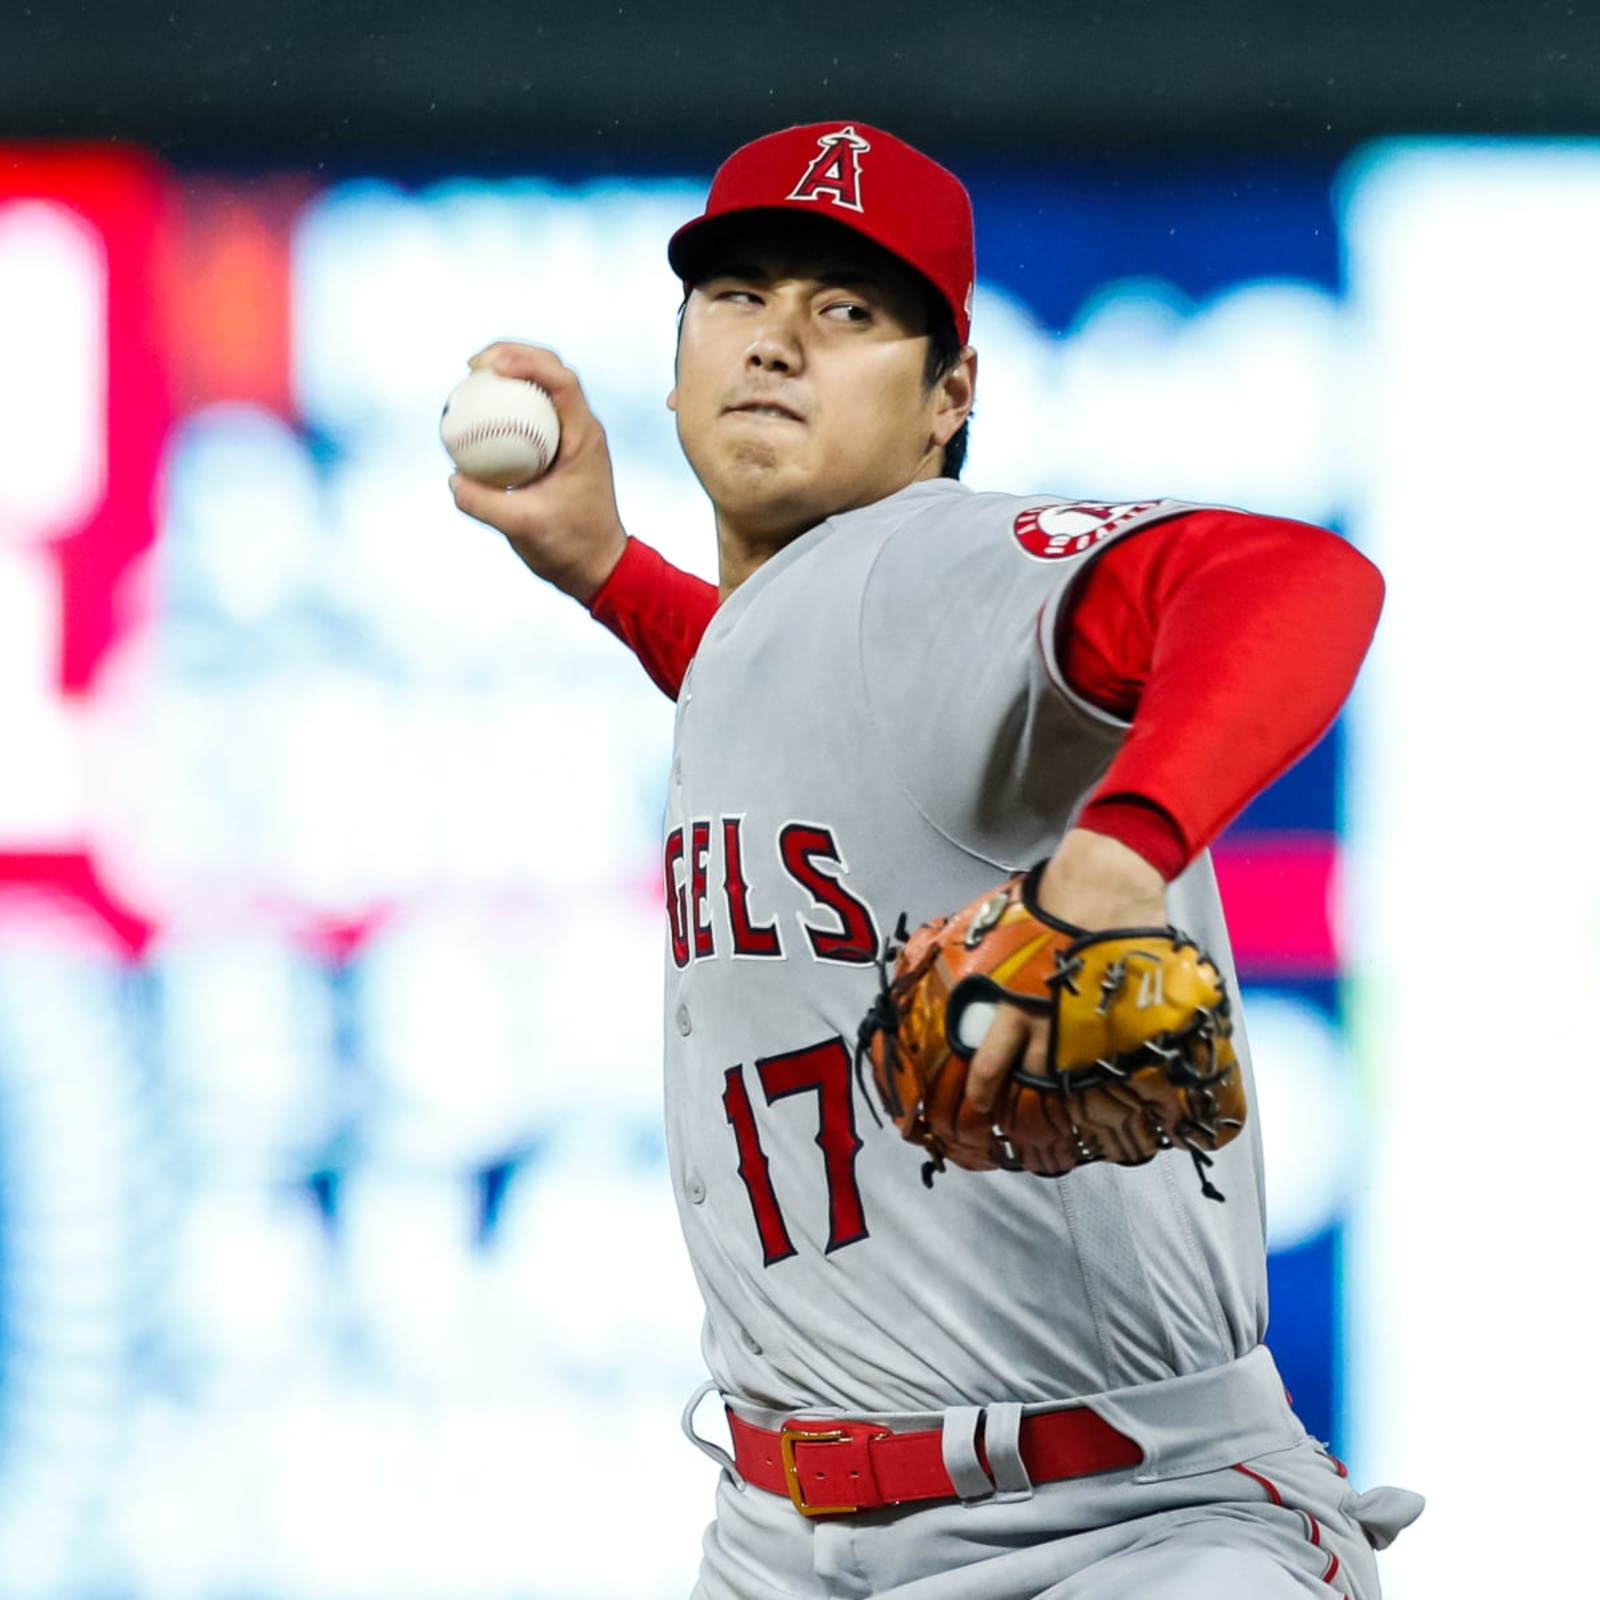 Angels star Shohei Ohtani's torrid stretch places him in elite company